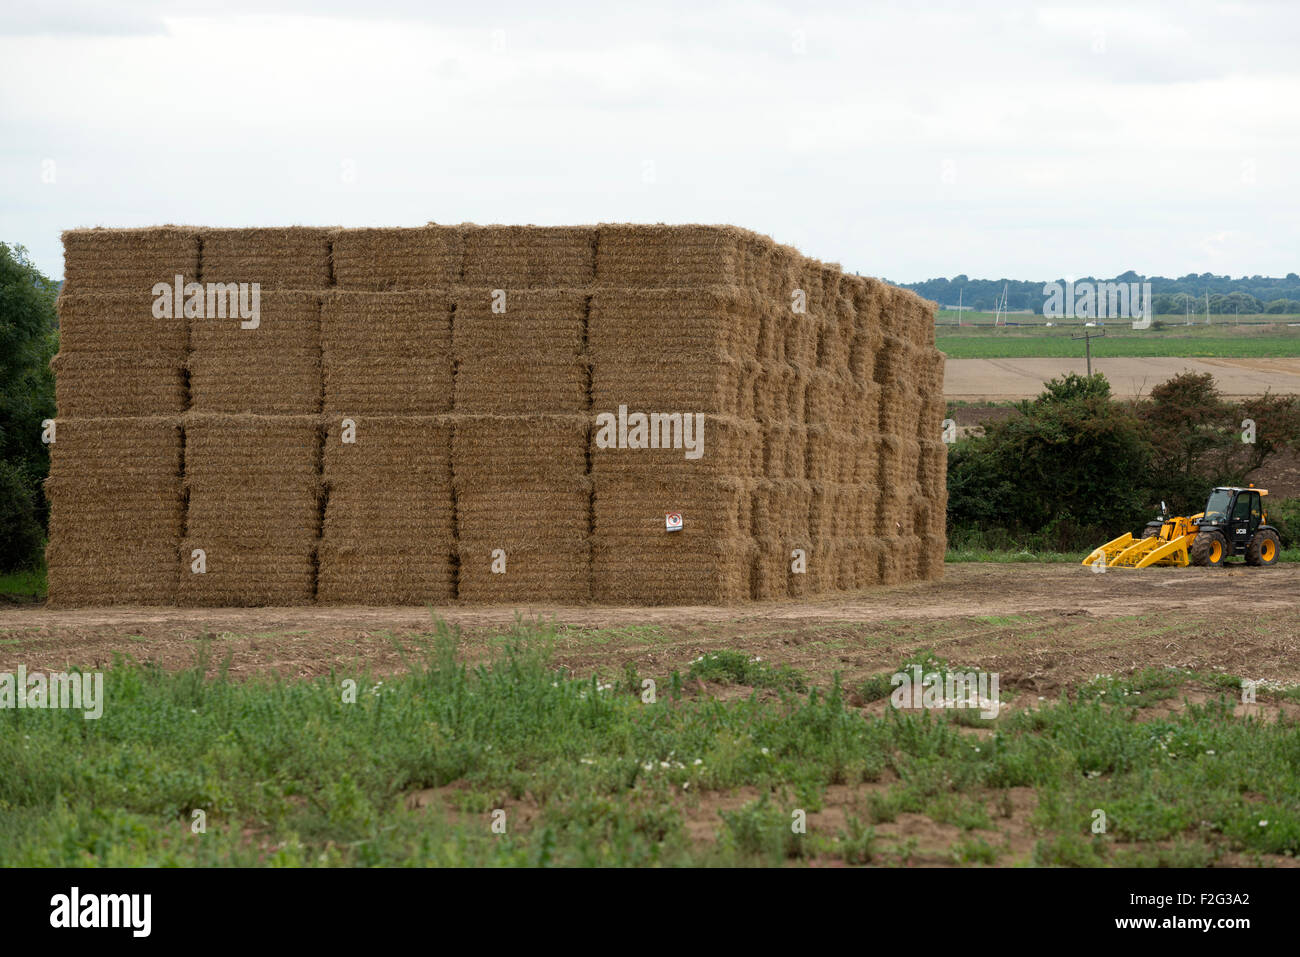 Giant straw bales stacked on a field, Bawdsey, Suffolk, UK. Stock Photo